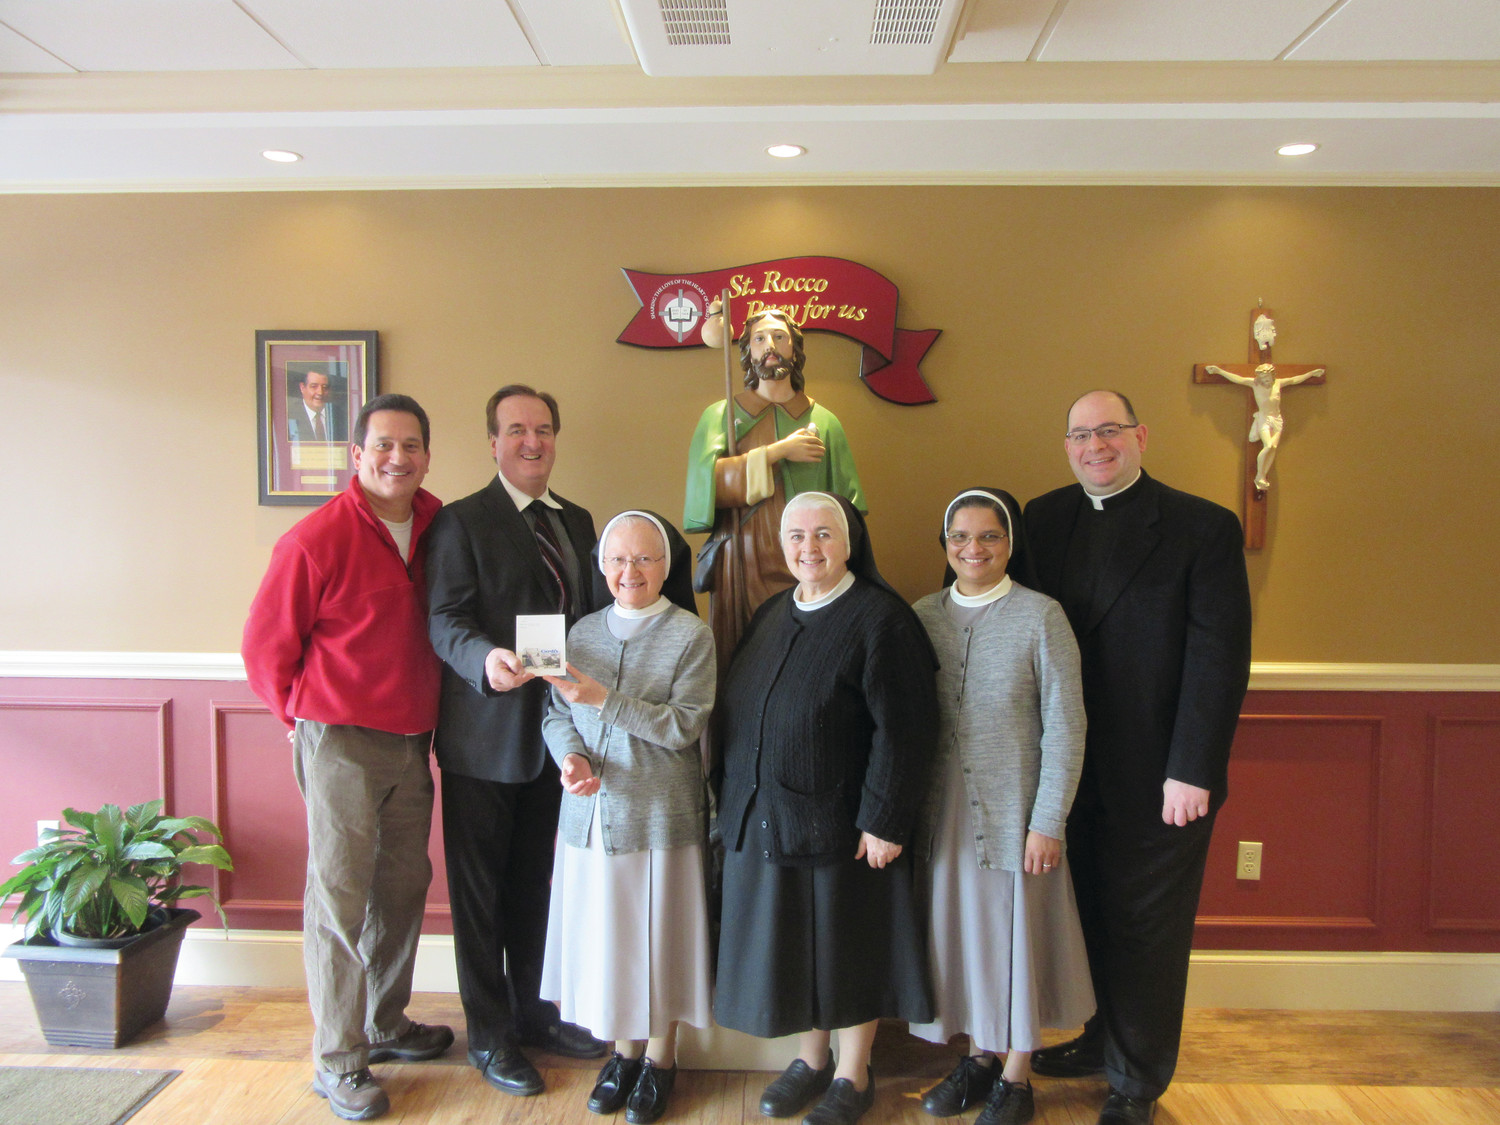 From left, Mike Montecalvo, Joe Lembo and Pastor Father Angelo Carusi present FMH Sisters Mary Antoinette Cappelli, Donna Beauregard and Daisy Kollamparampil with a Cardi’s gift card in recognition of their service and dedication.